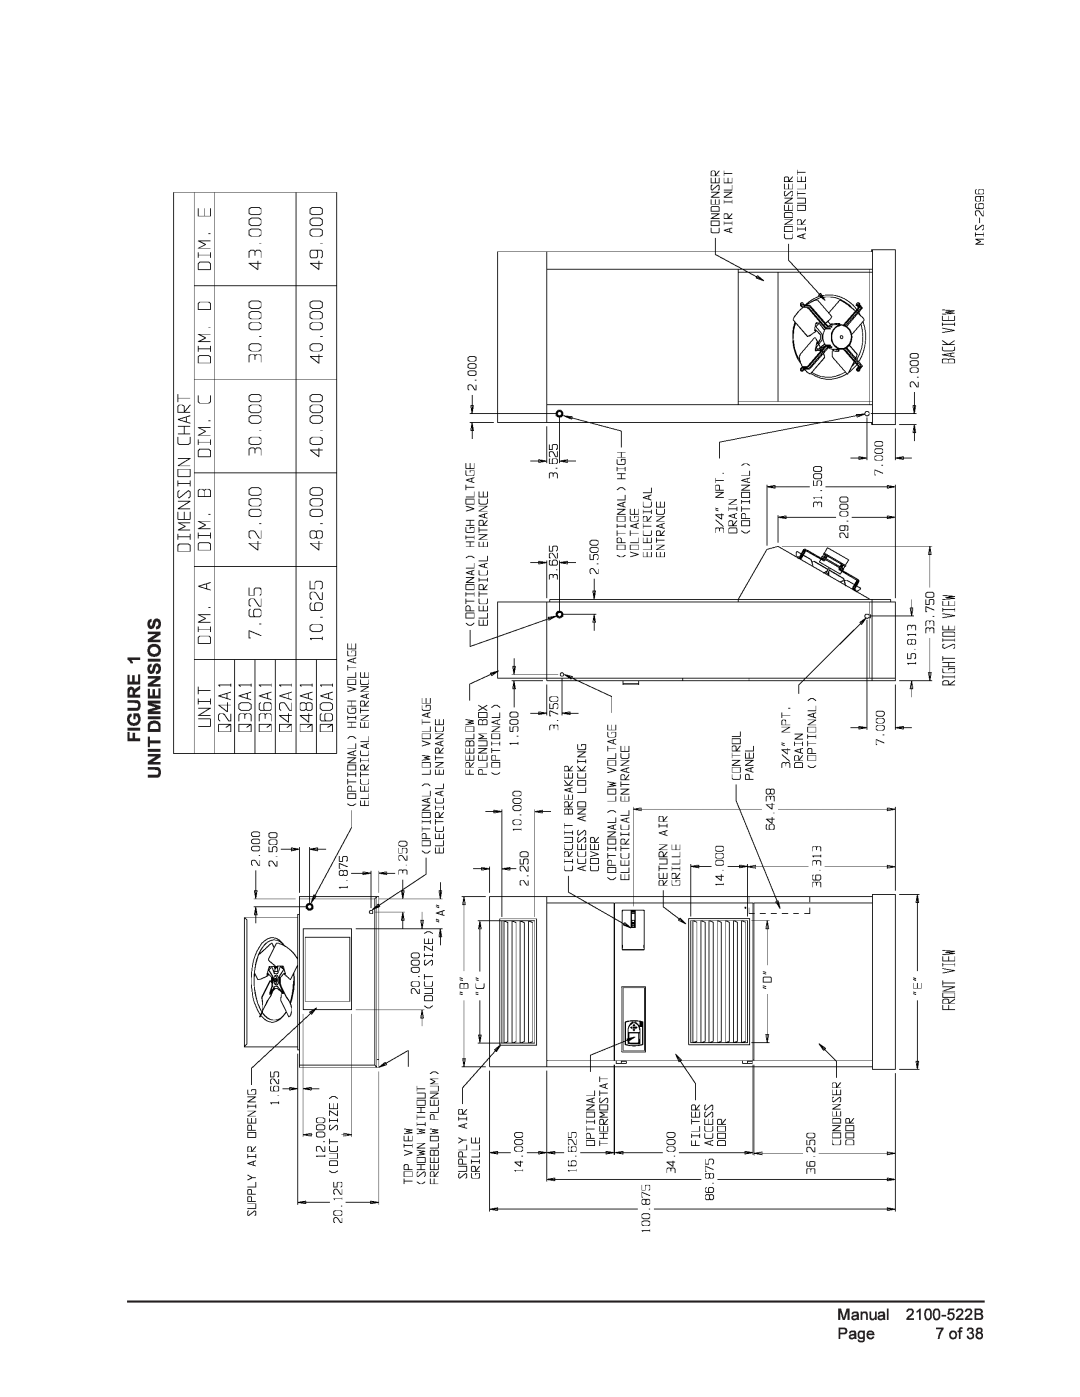 Bard Q36A1, Q30A1, Q42A1, Q60A1, Q24A1, Q48A1 installation instructions Unit Dimensions Figure, Manual, Page, 7 of 